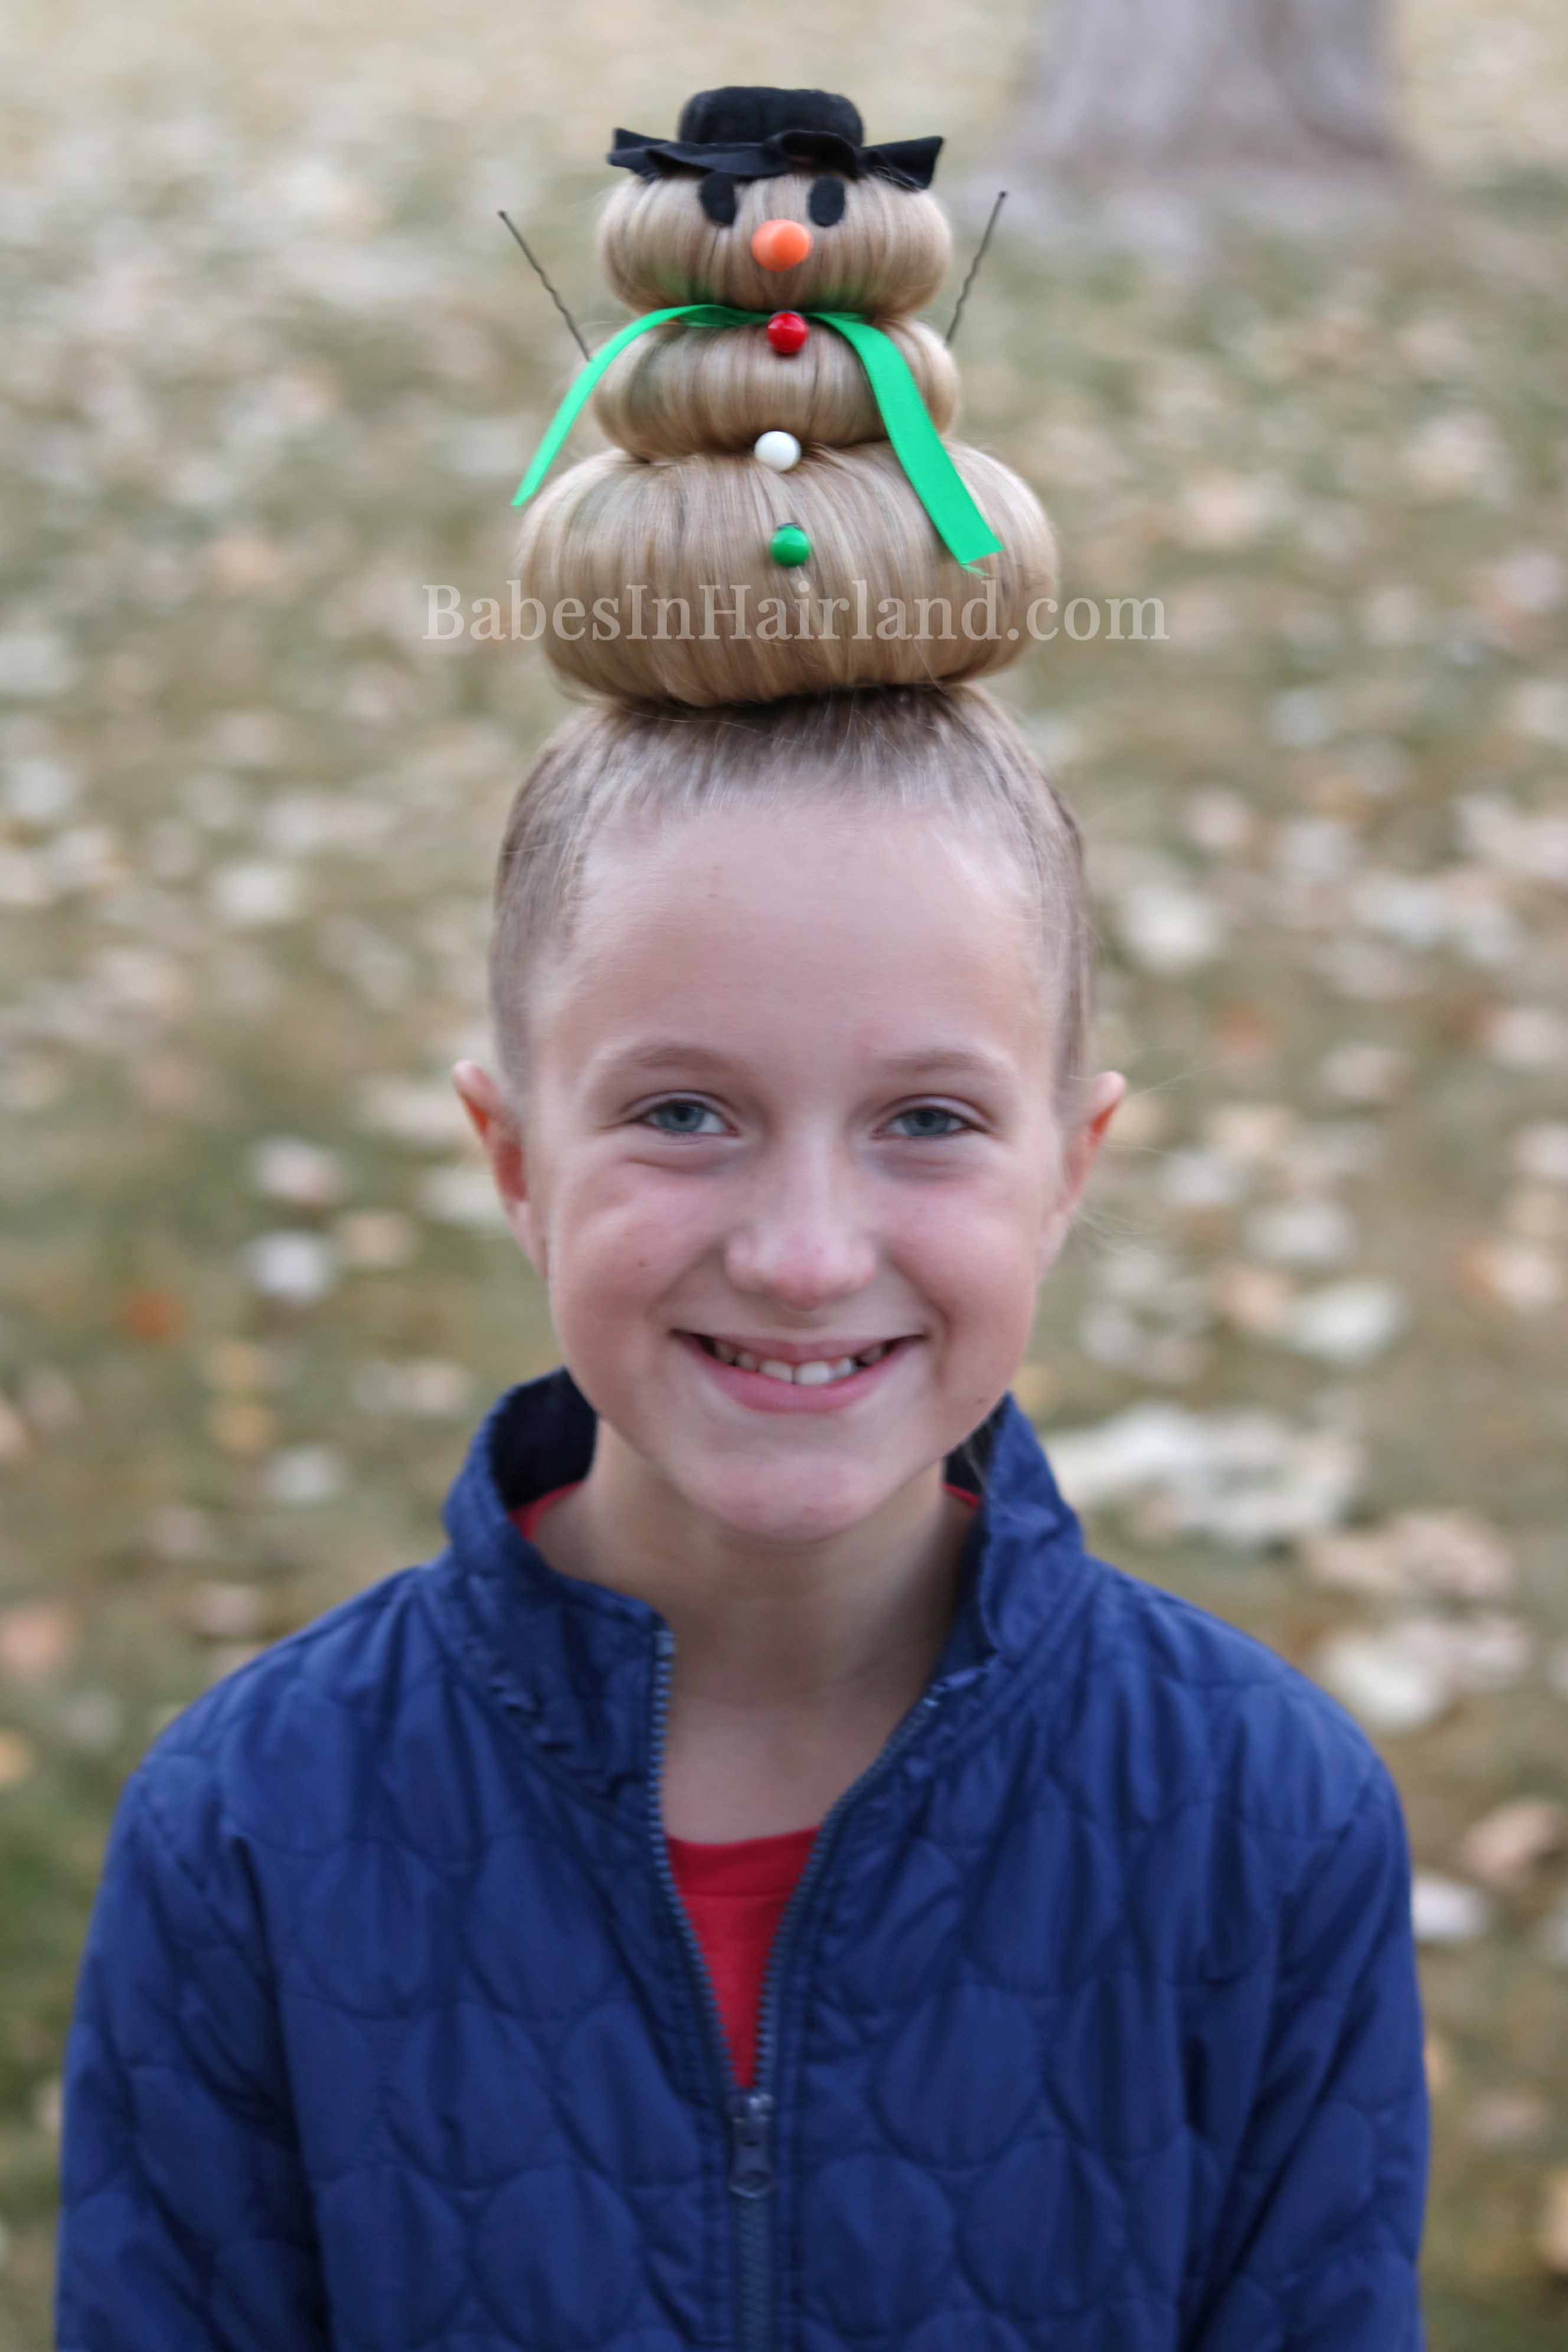 Snowman Hairstyle for Crazy Hair Day (or Christmas)